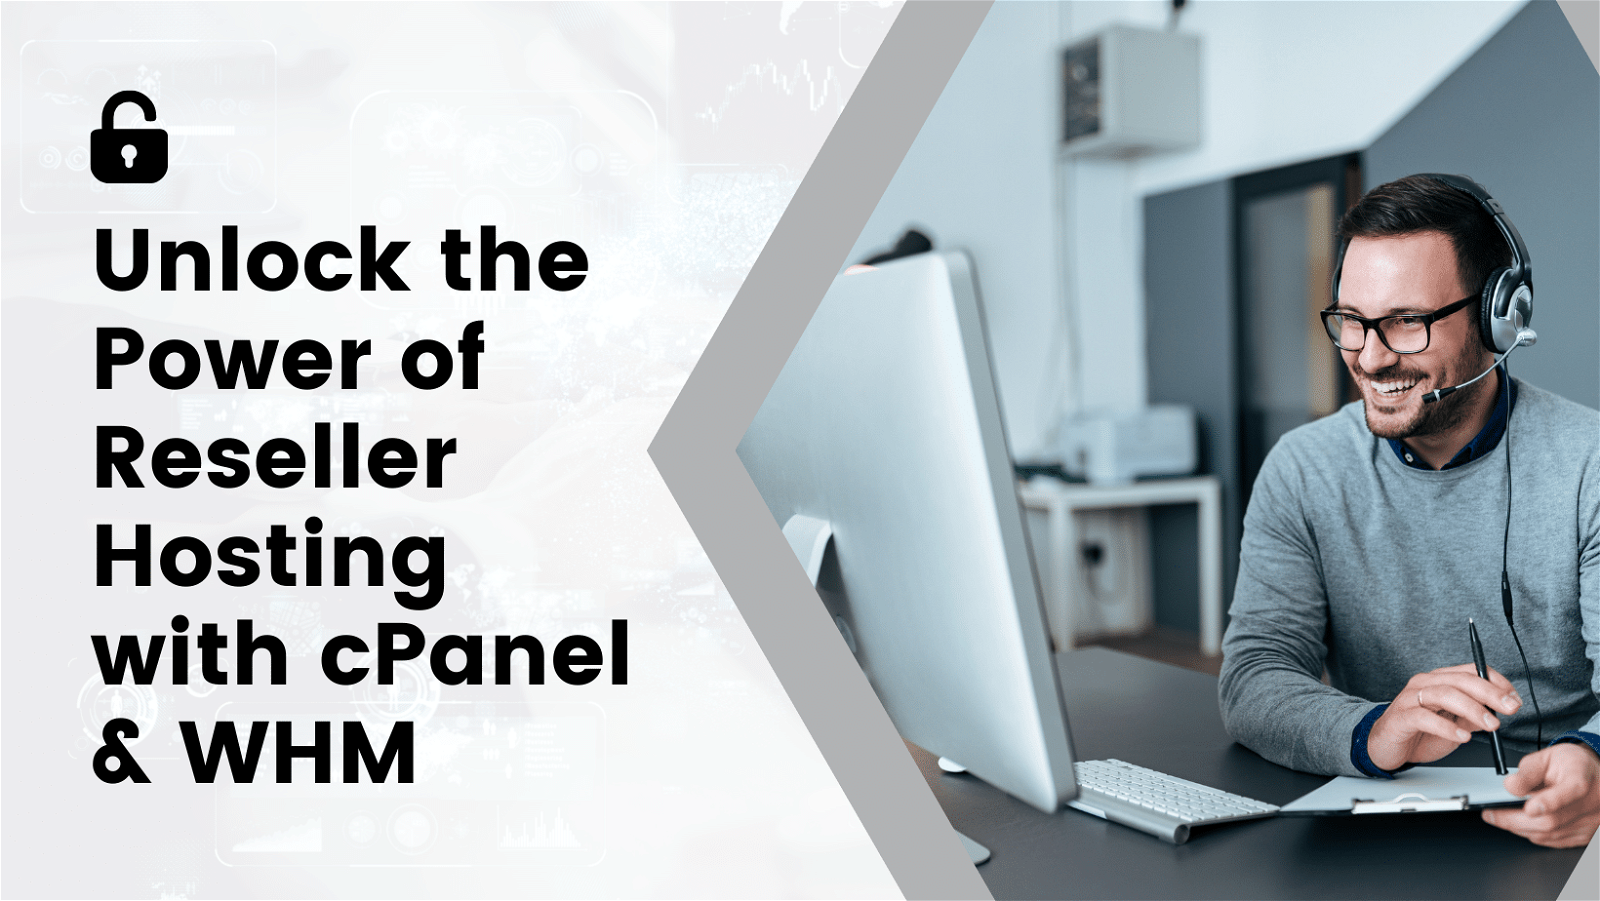 Unlock the power of Reseller Hosting with cPanel & WHM.